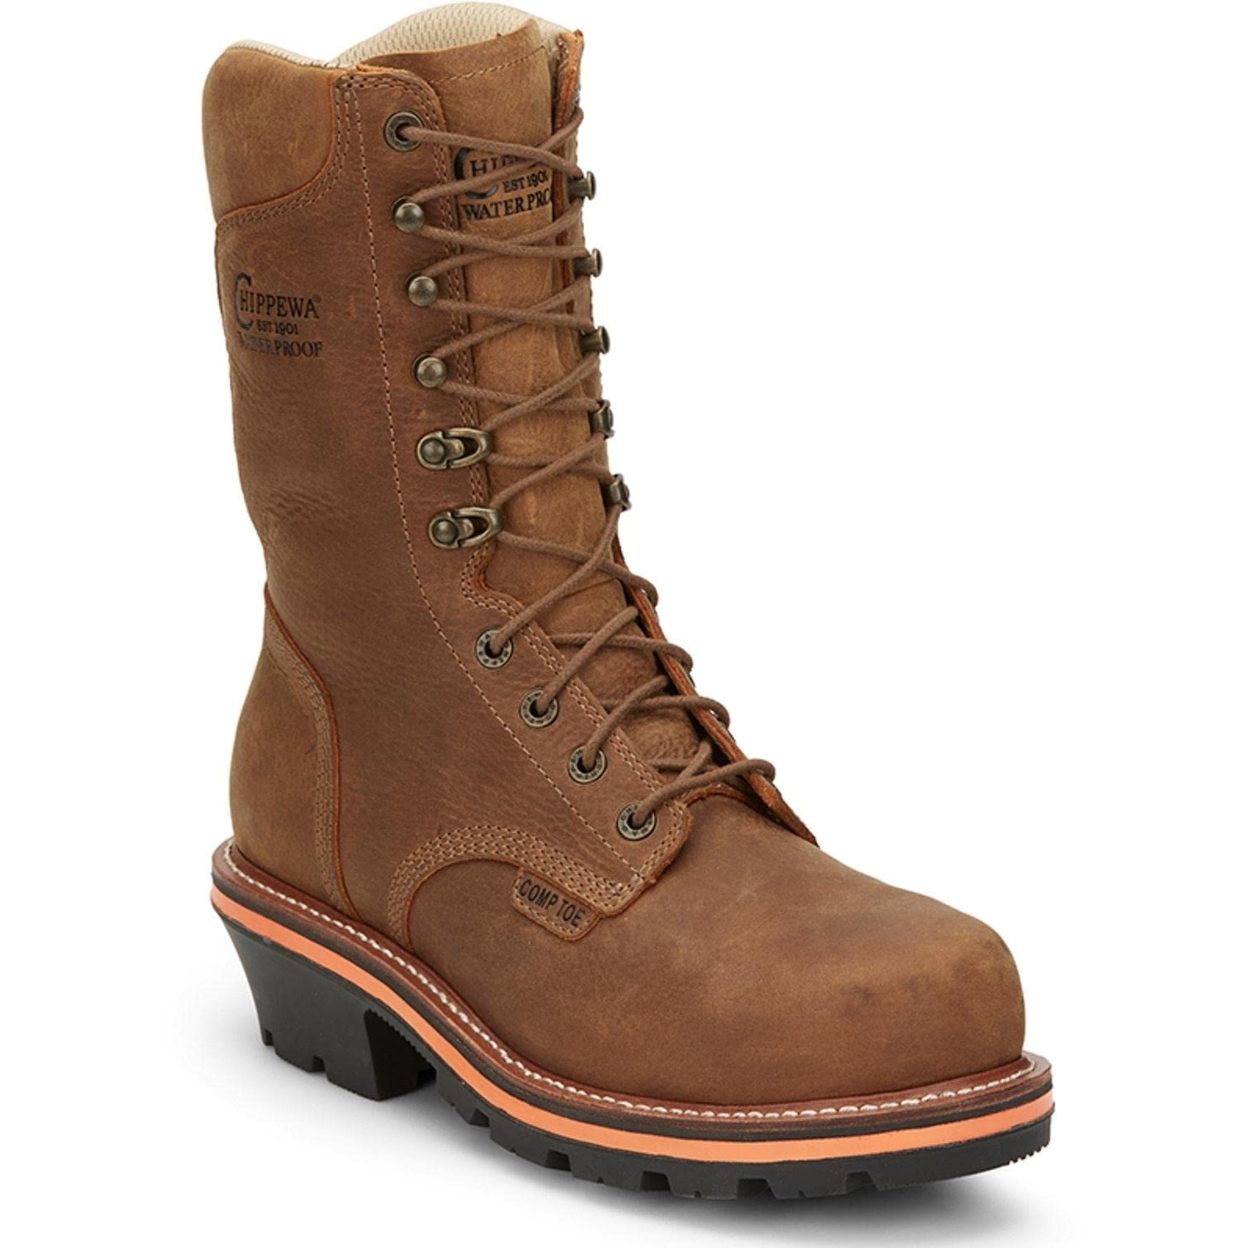 Chippewa Men's 10 Thunderstruck Logger Waterproof Composite Toe Insulated Lace-Up Work Boot Brown - TH1030 ONE SIZE TAN - TAN, 10.5-2E